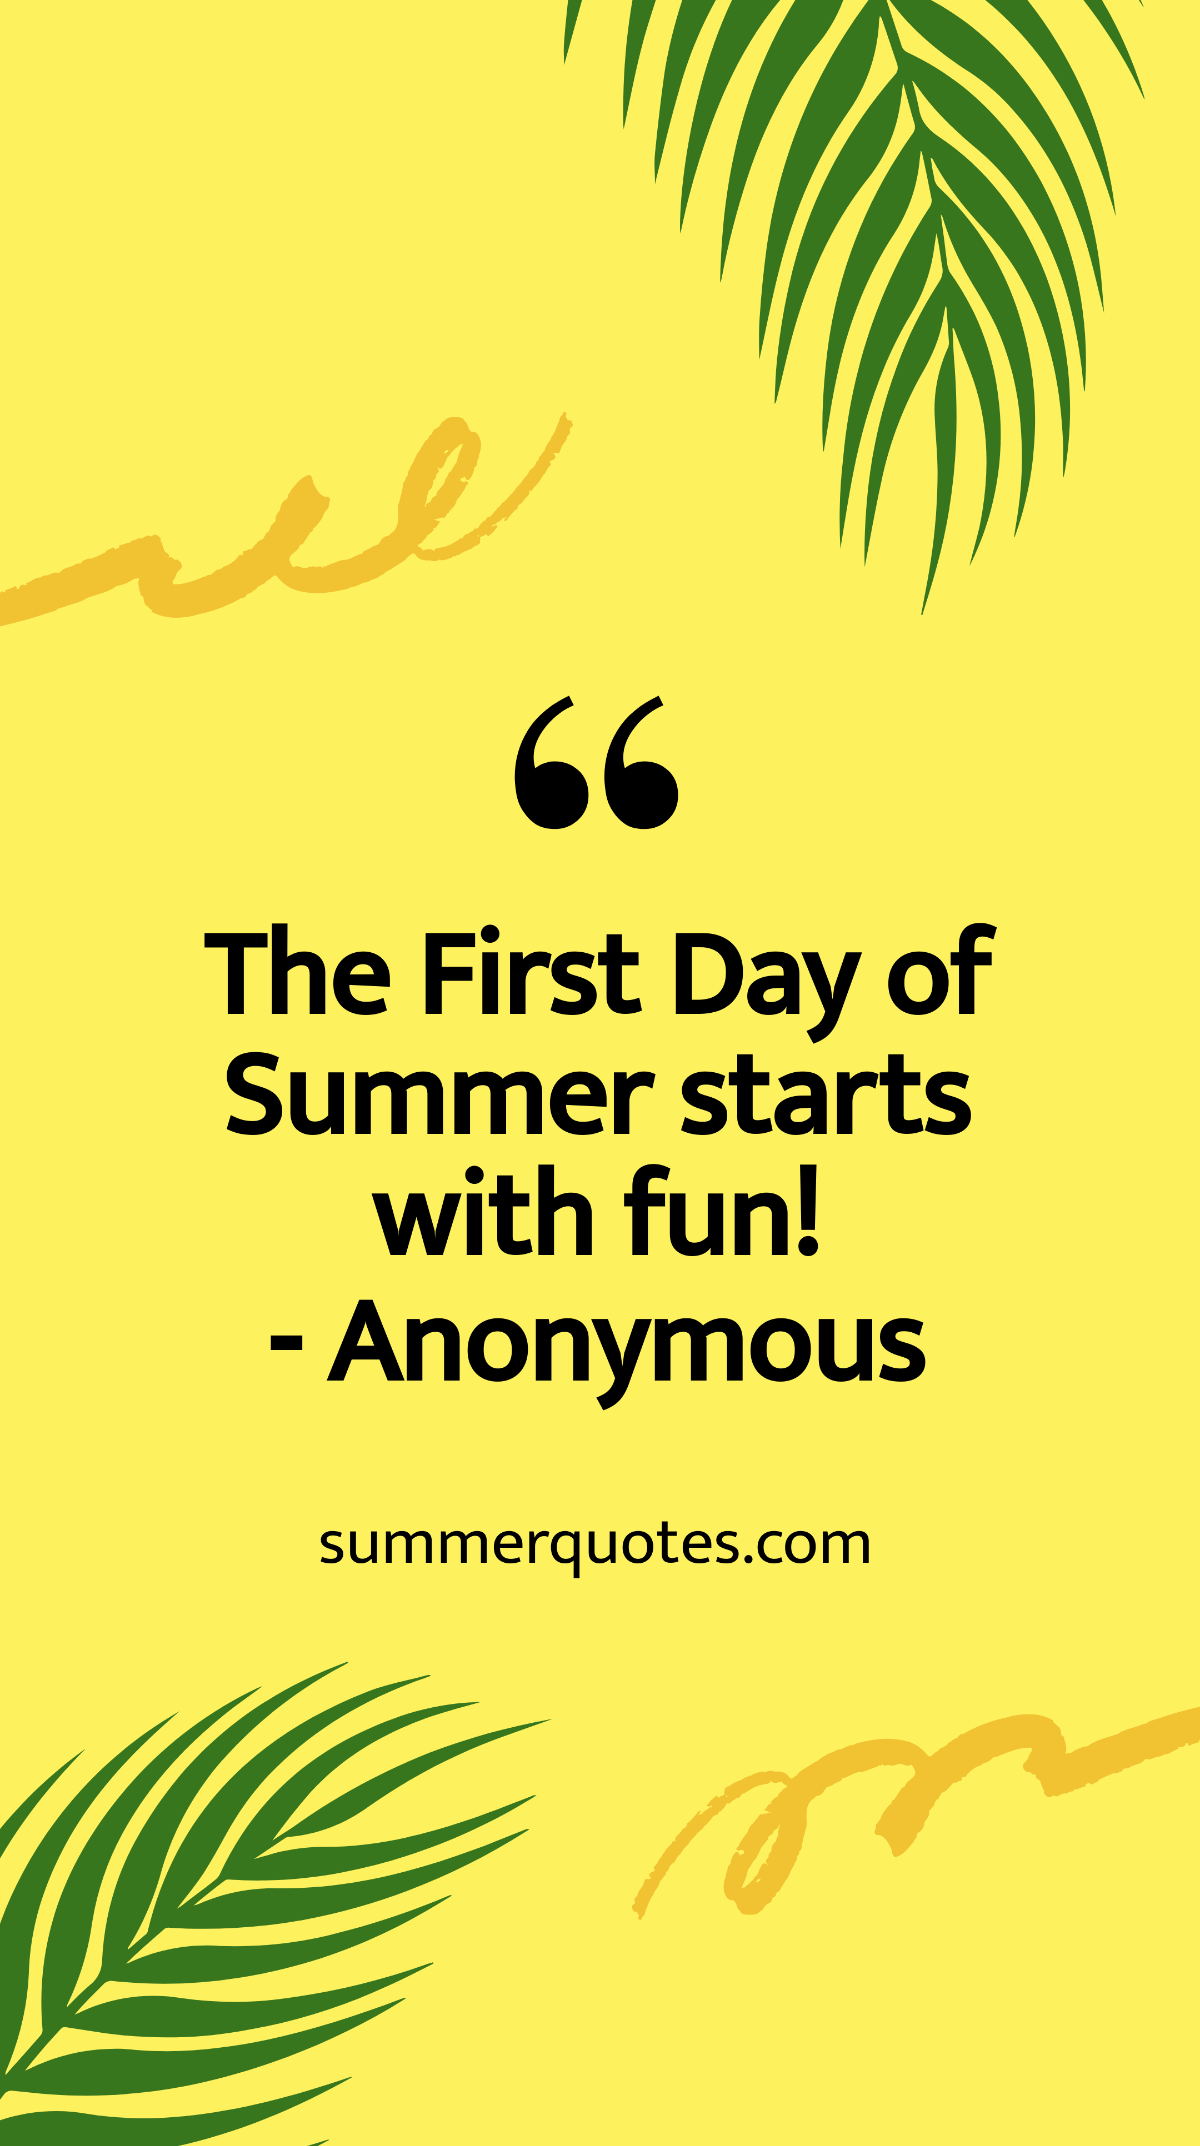 First Day of Summer Quote Whatsapp Post